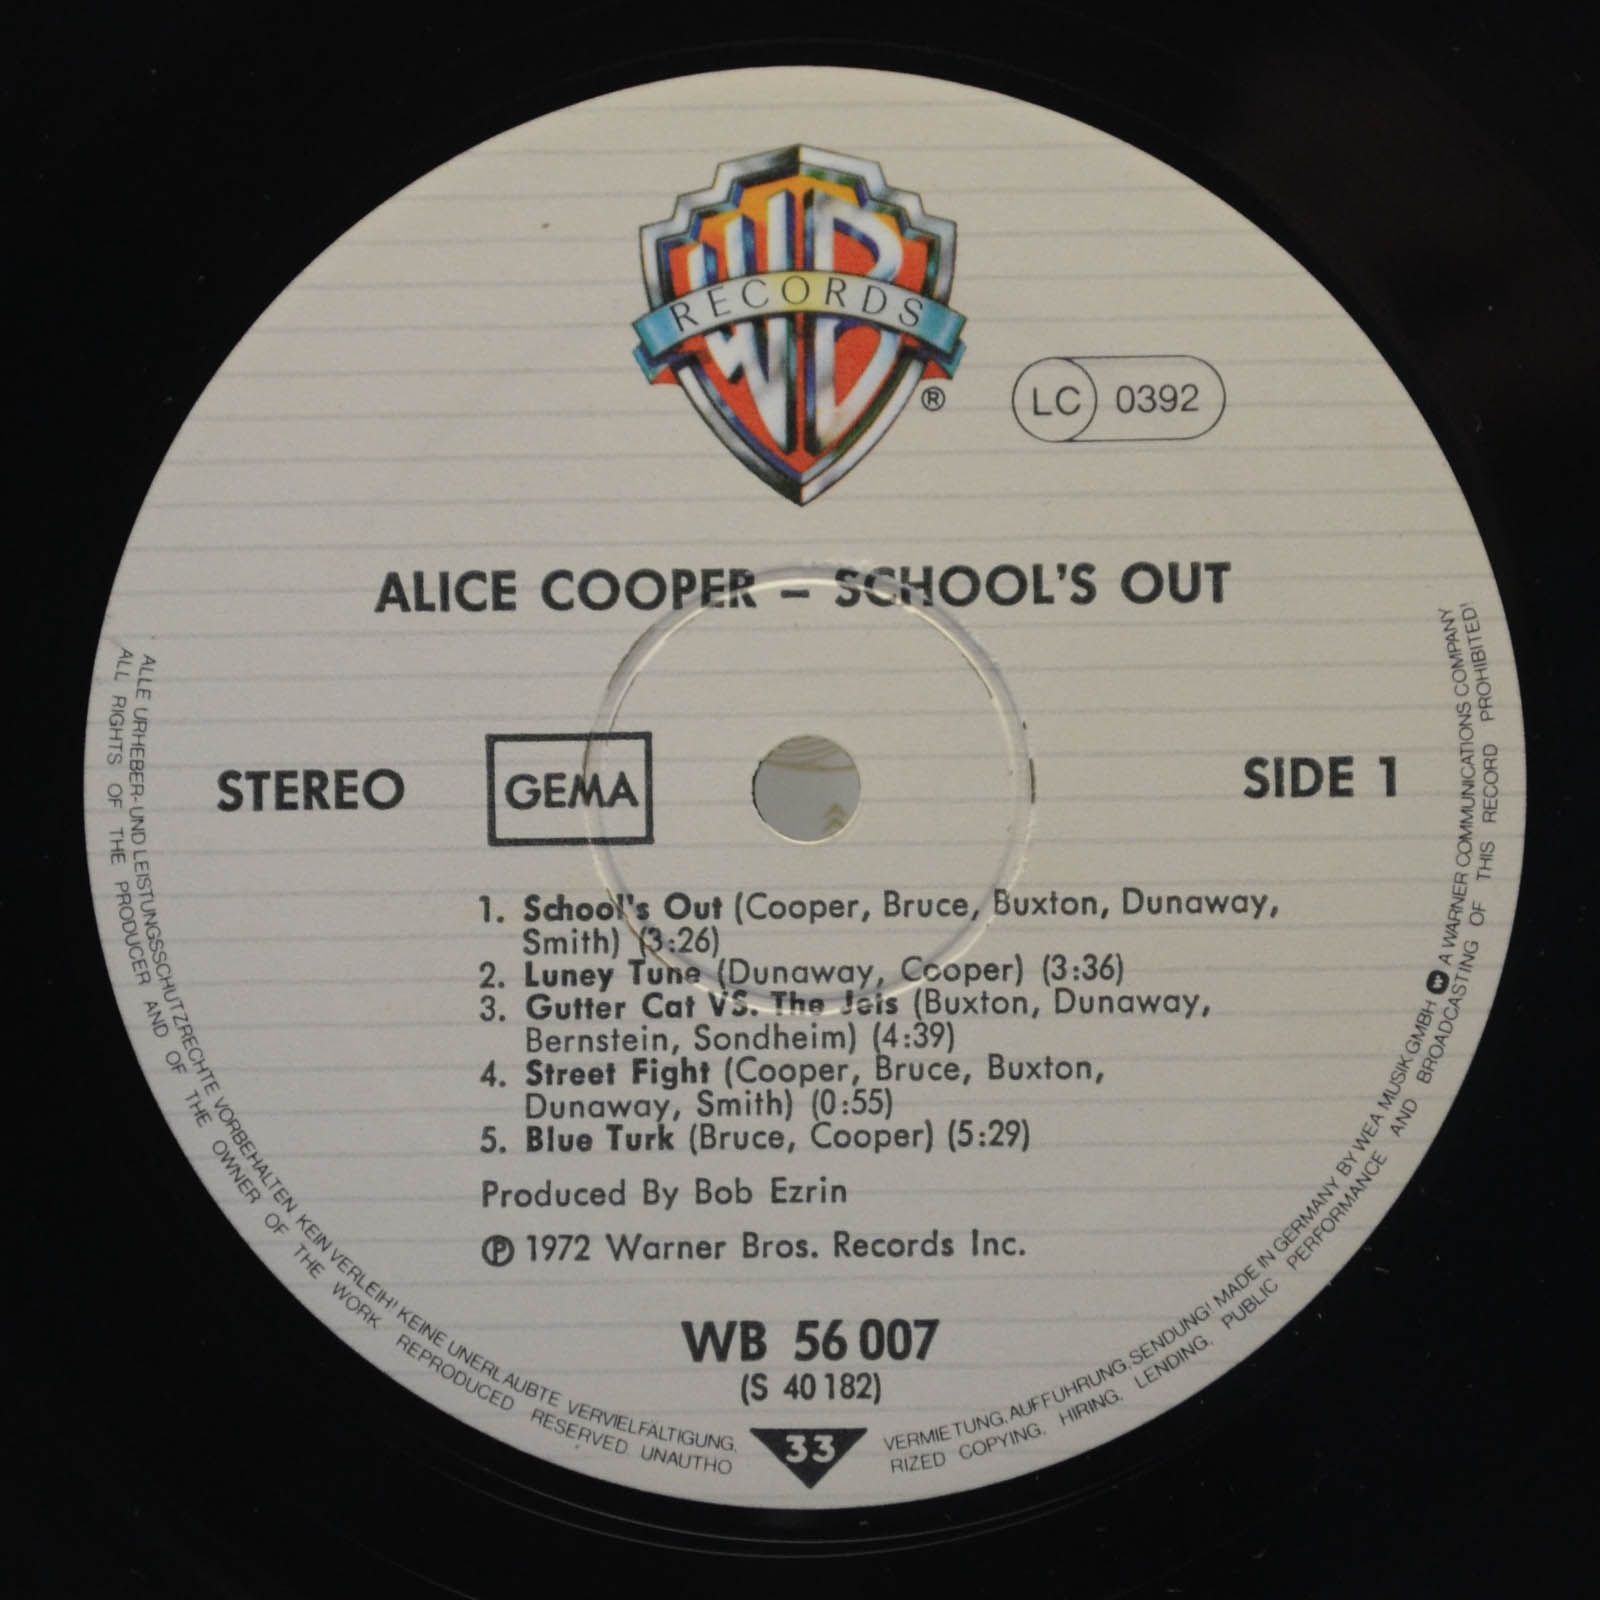 Alice Cooper — School's Out, 1972